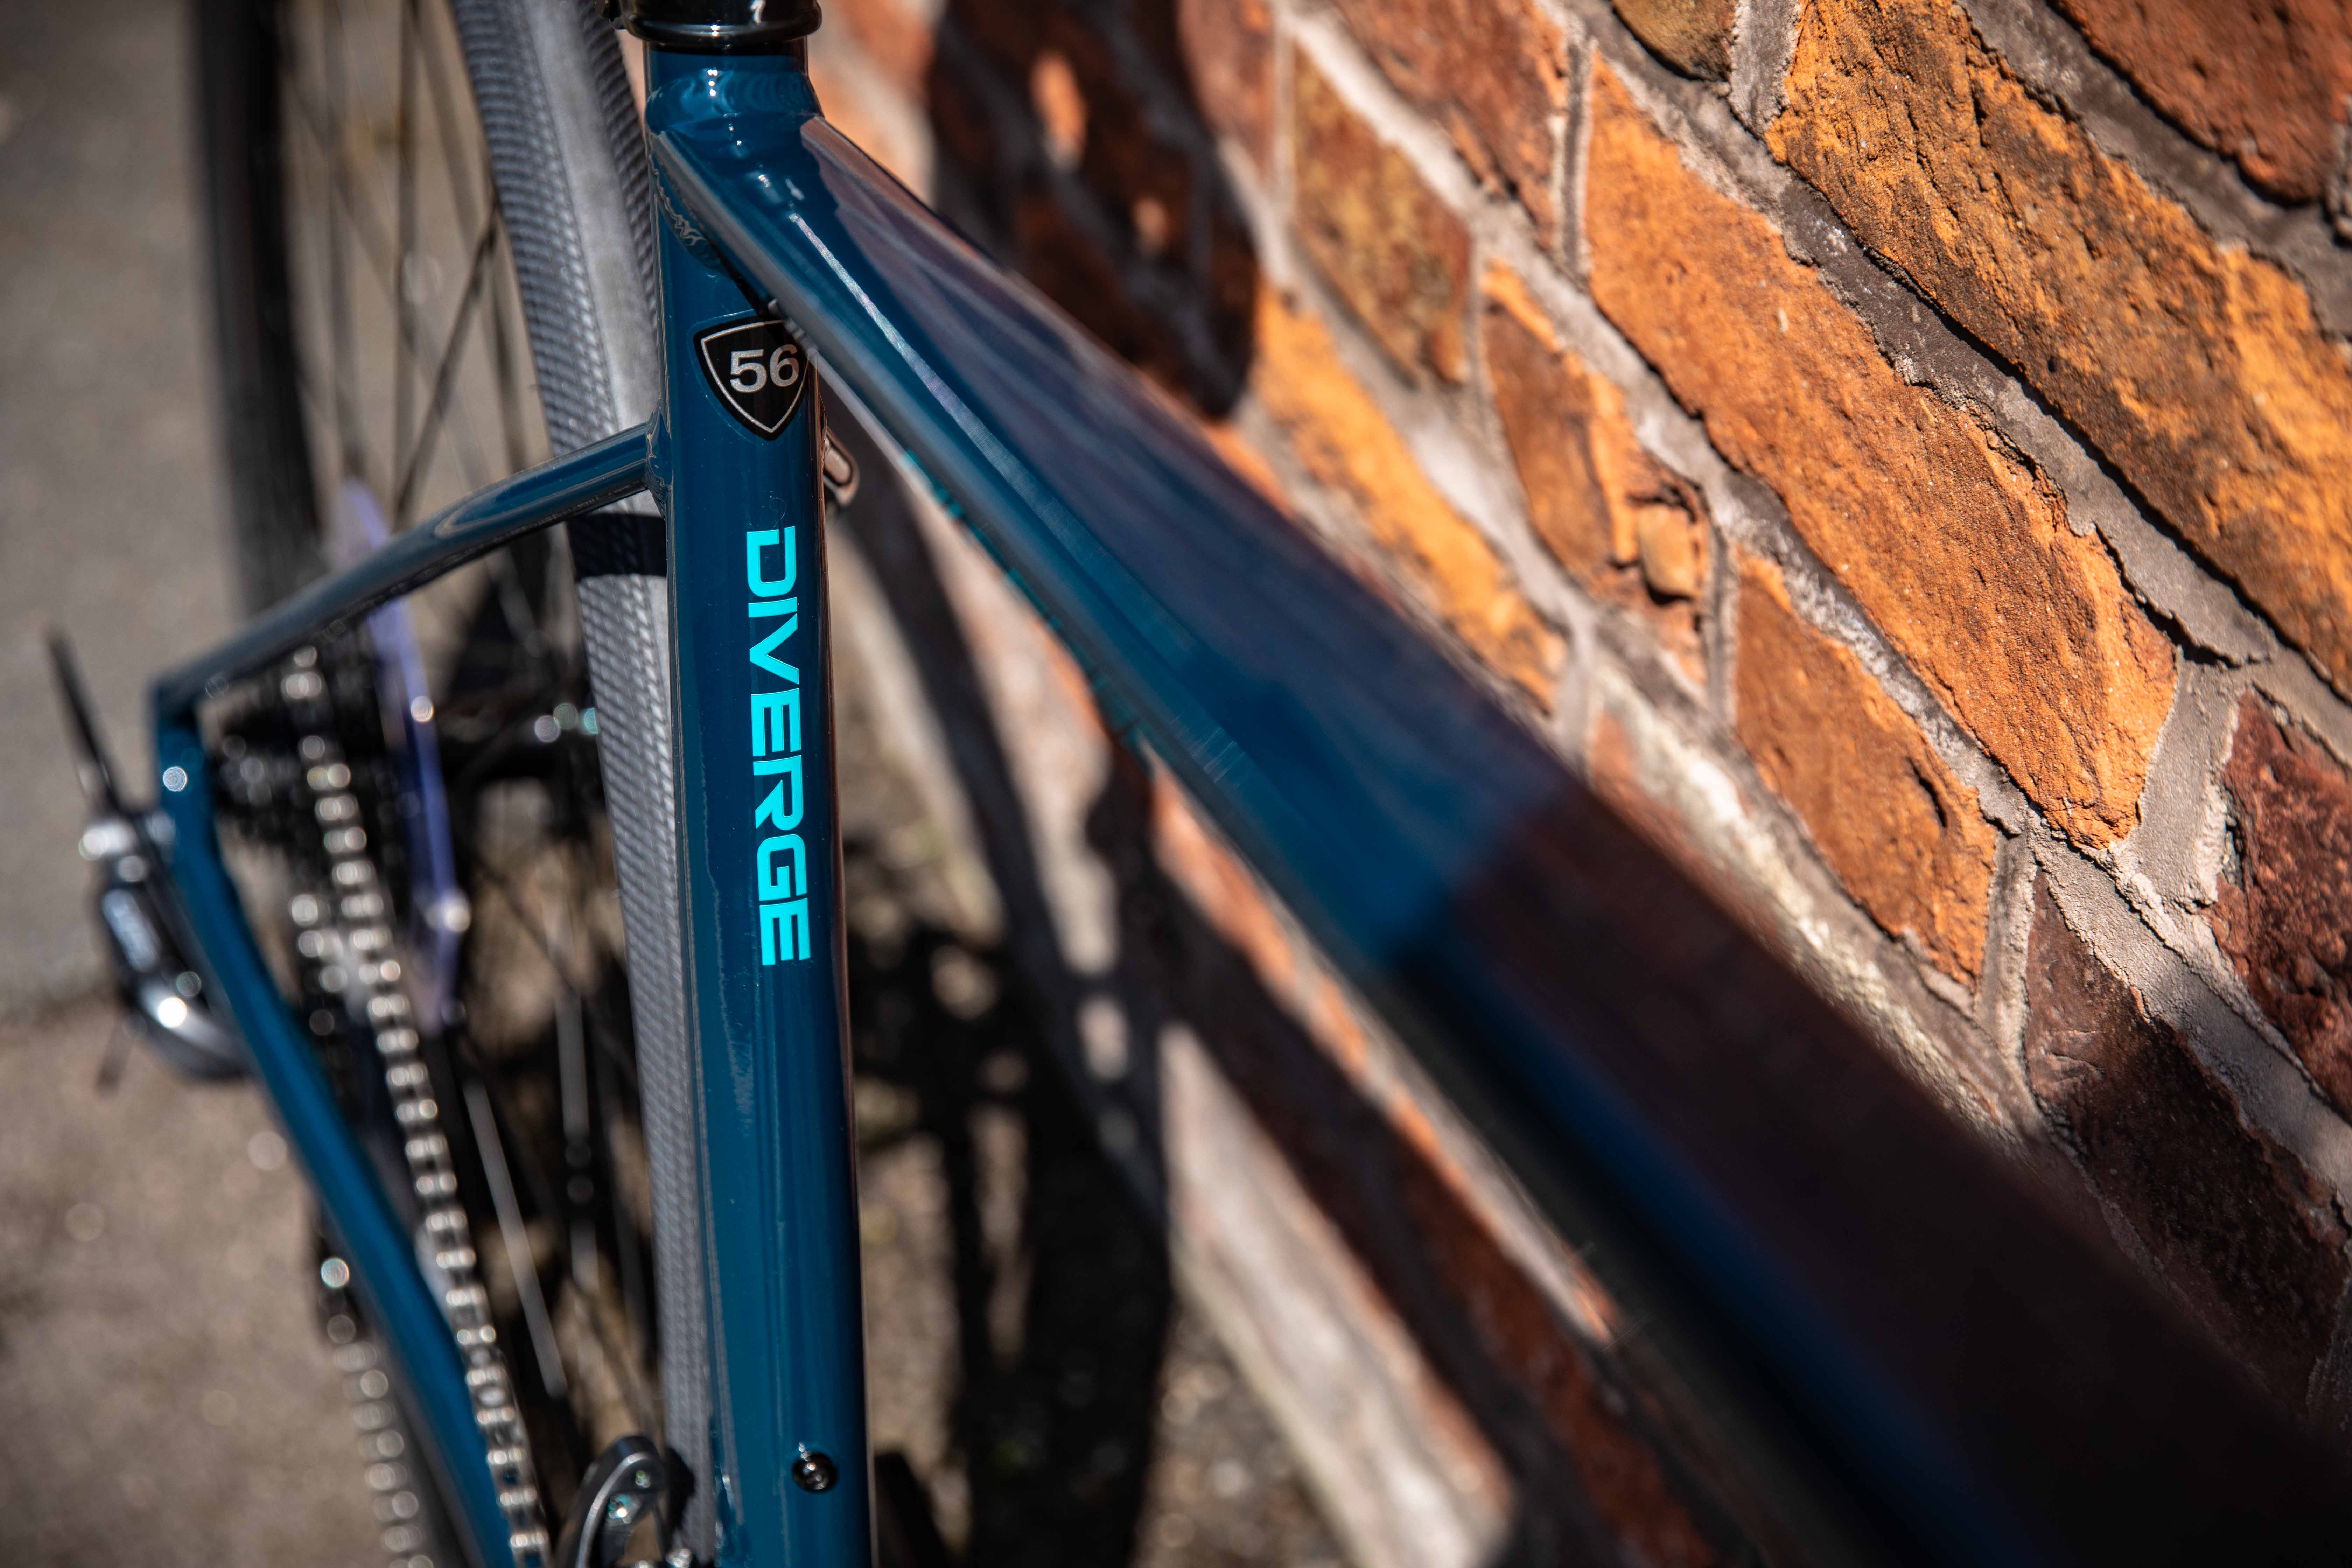 specialized diverge e5 2020 road bike review